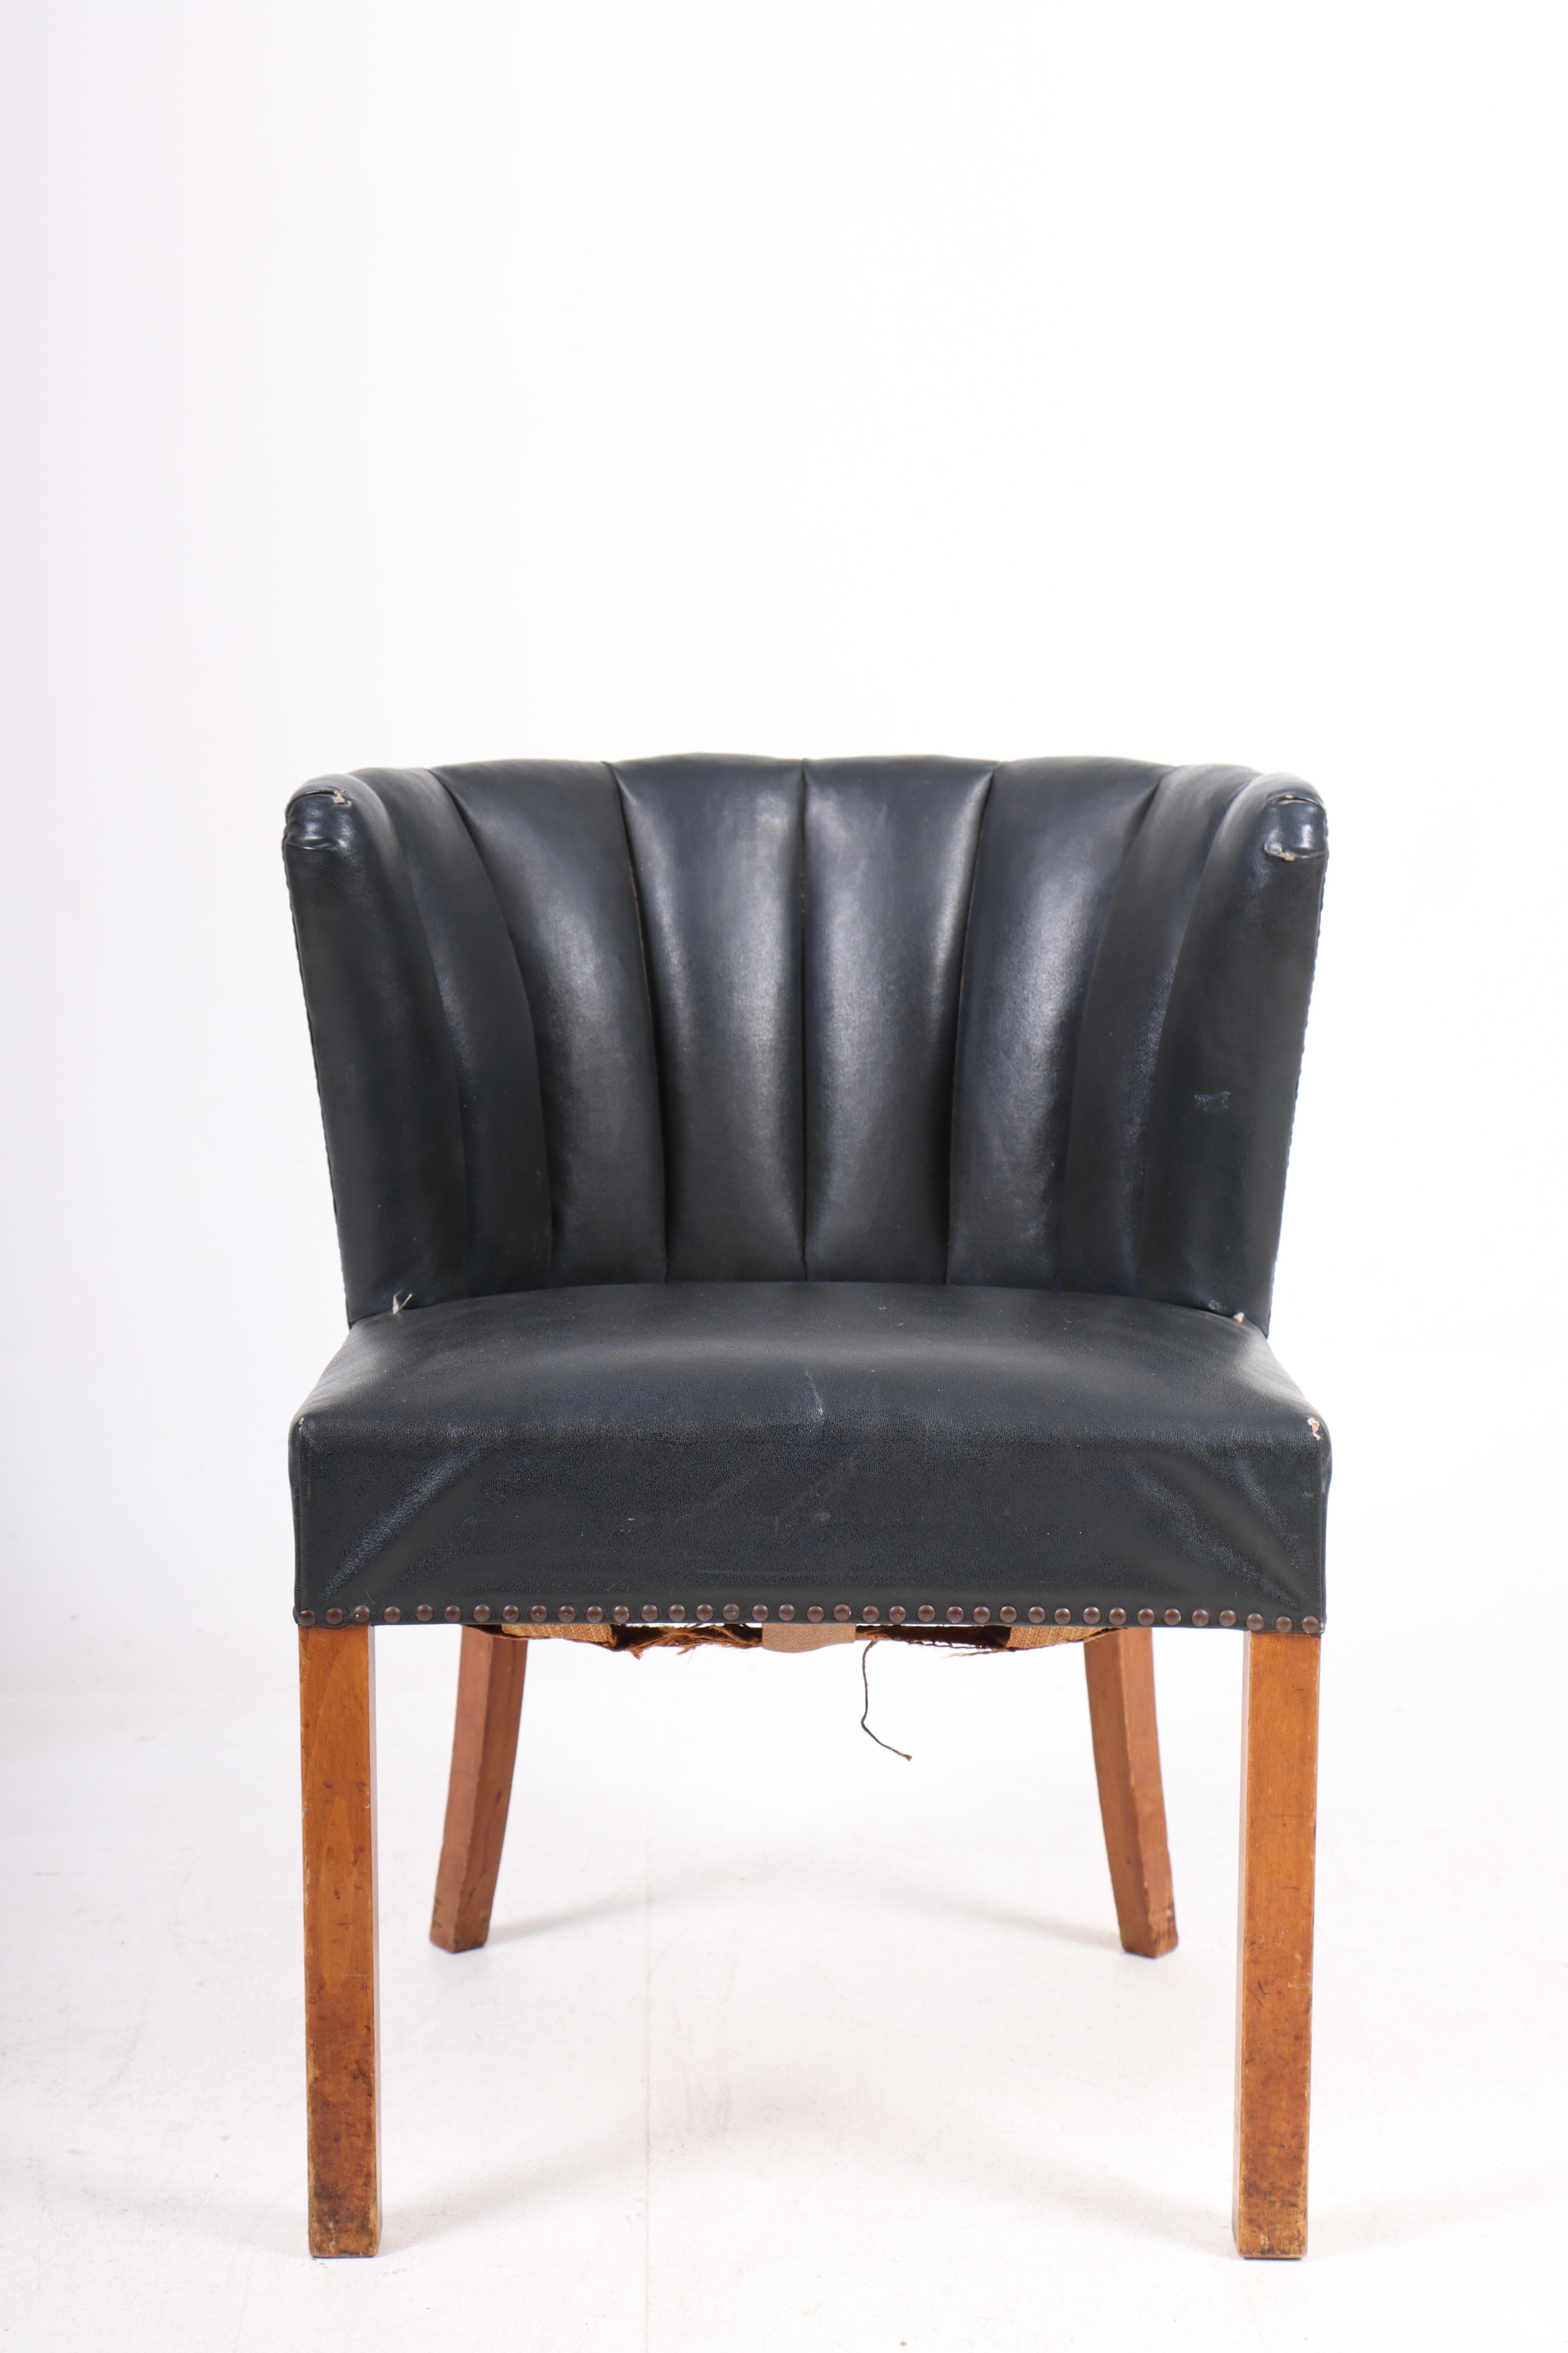 Armchair in faux leather designed and made by Fritz Hansen in 1940s. Original condition.